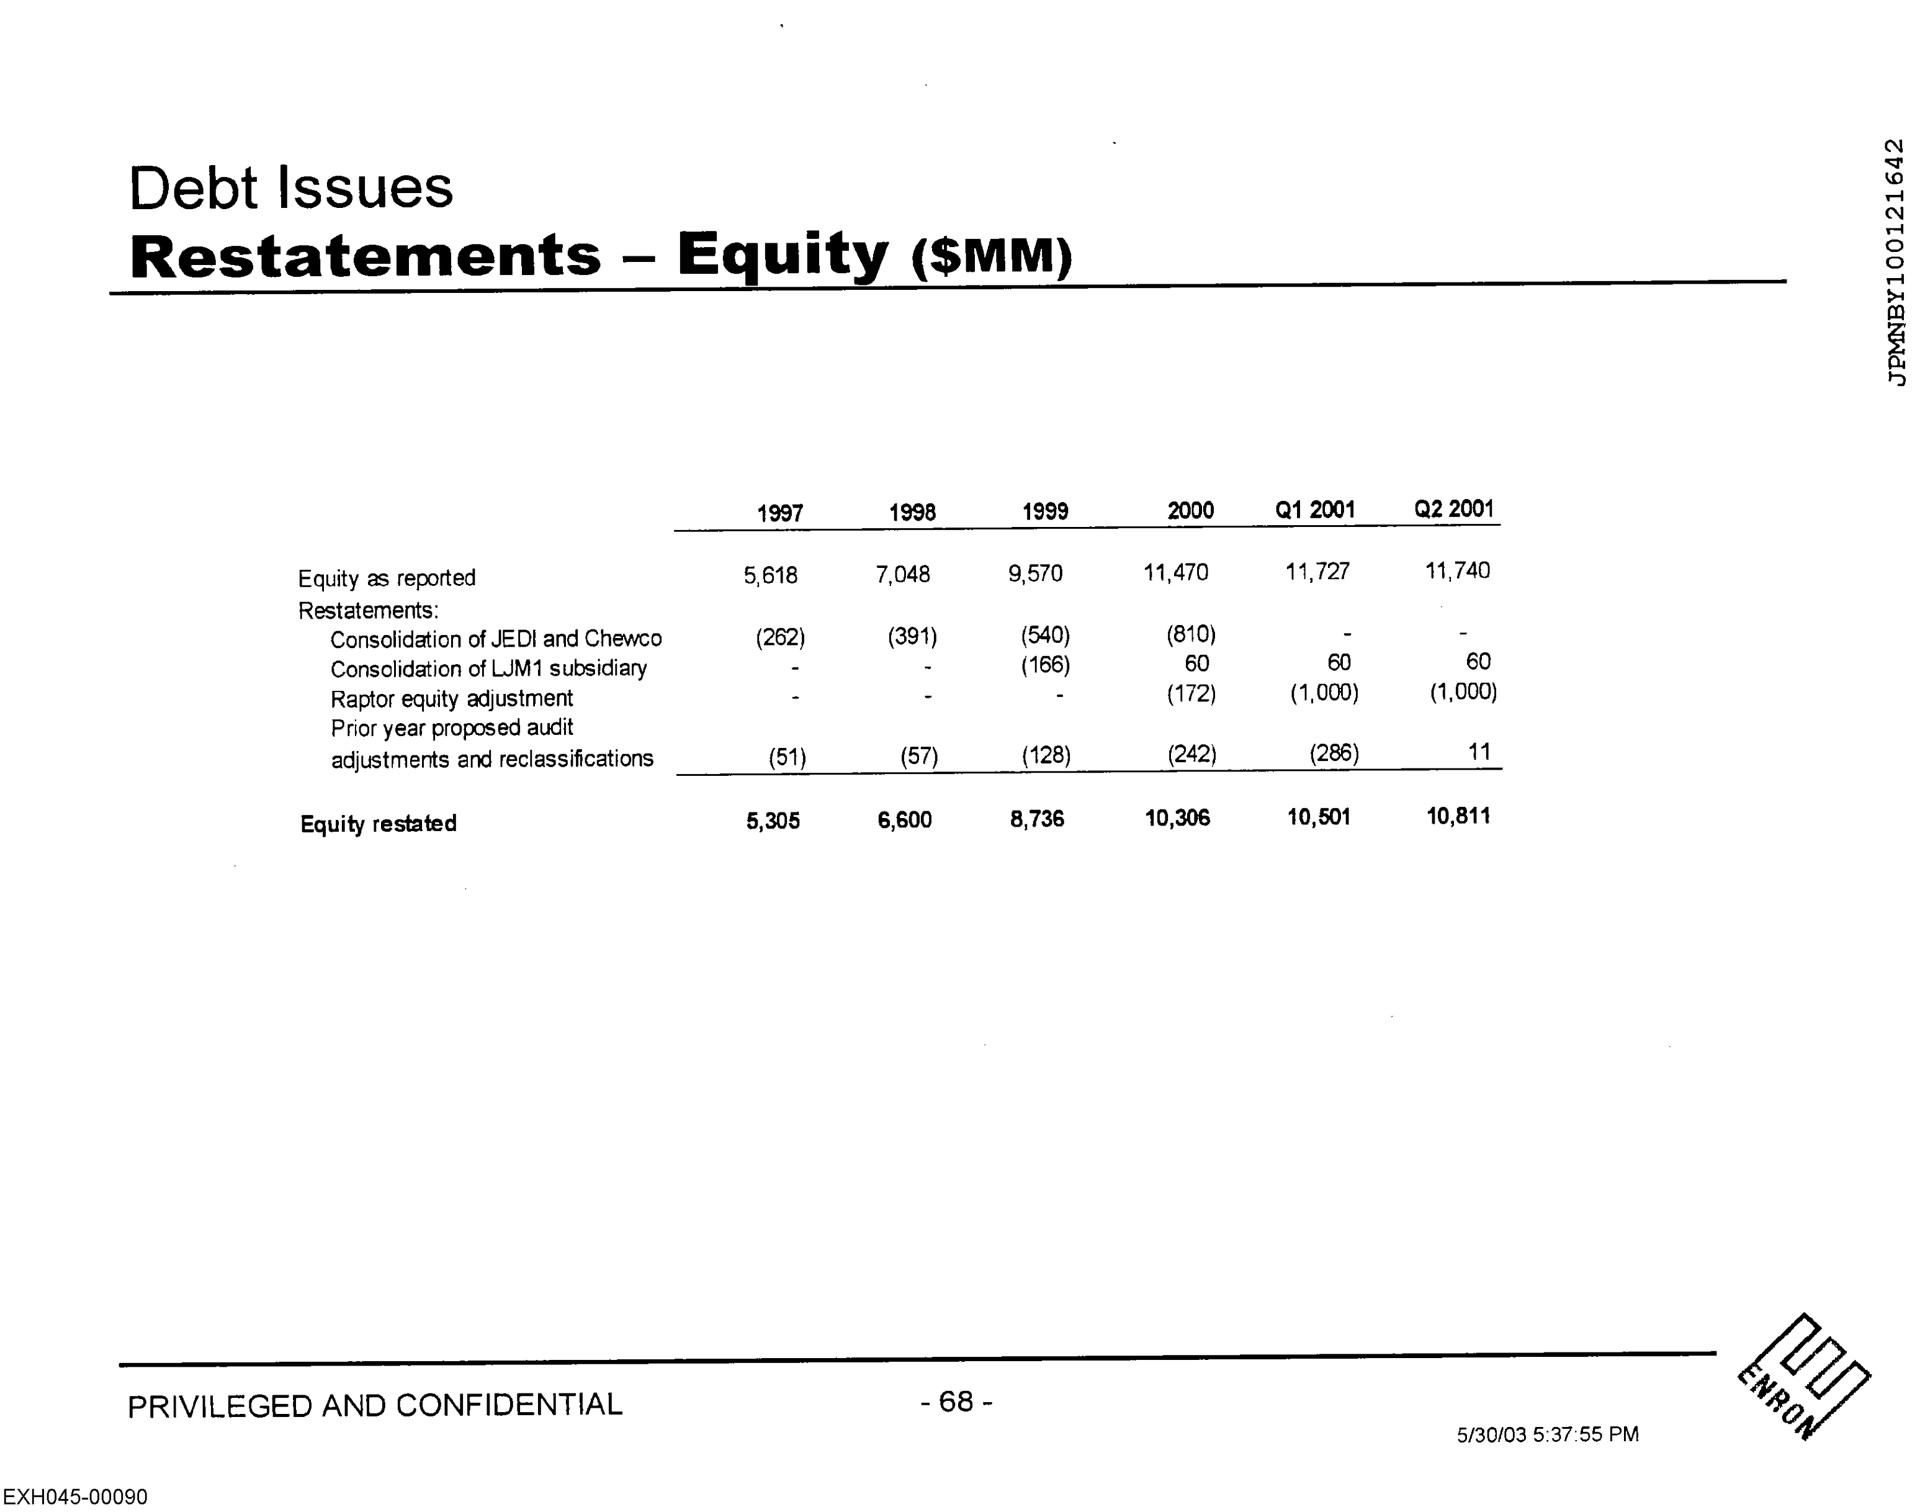 debt issues restatements equity | Enron